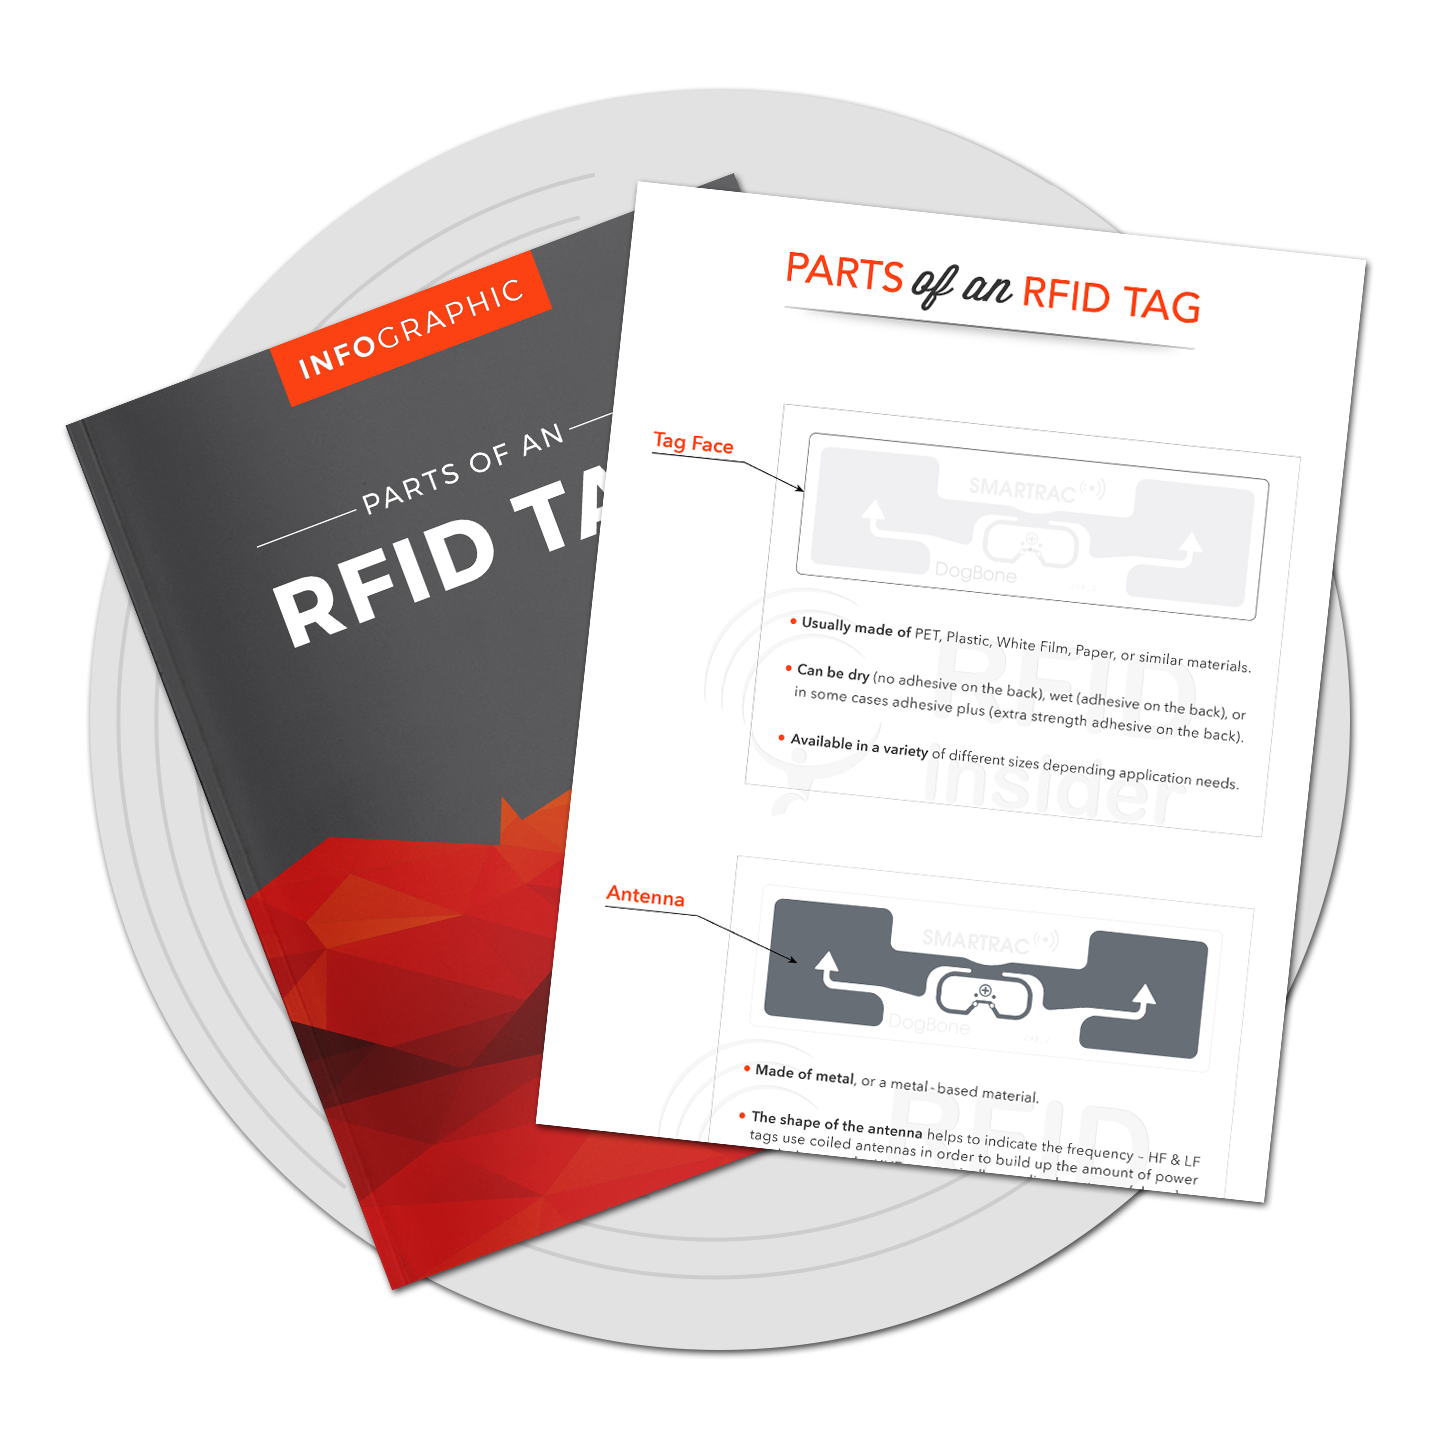 Parts of an RFID Tag Infographic